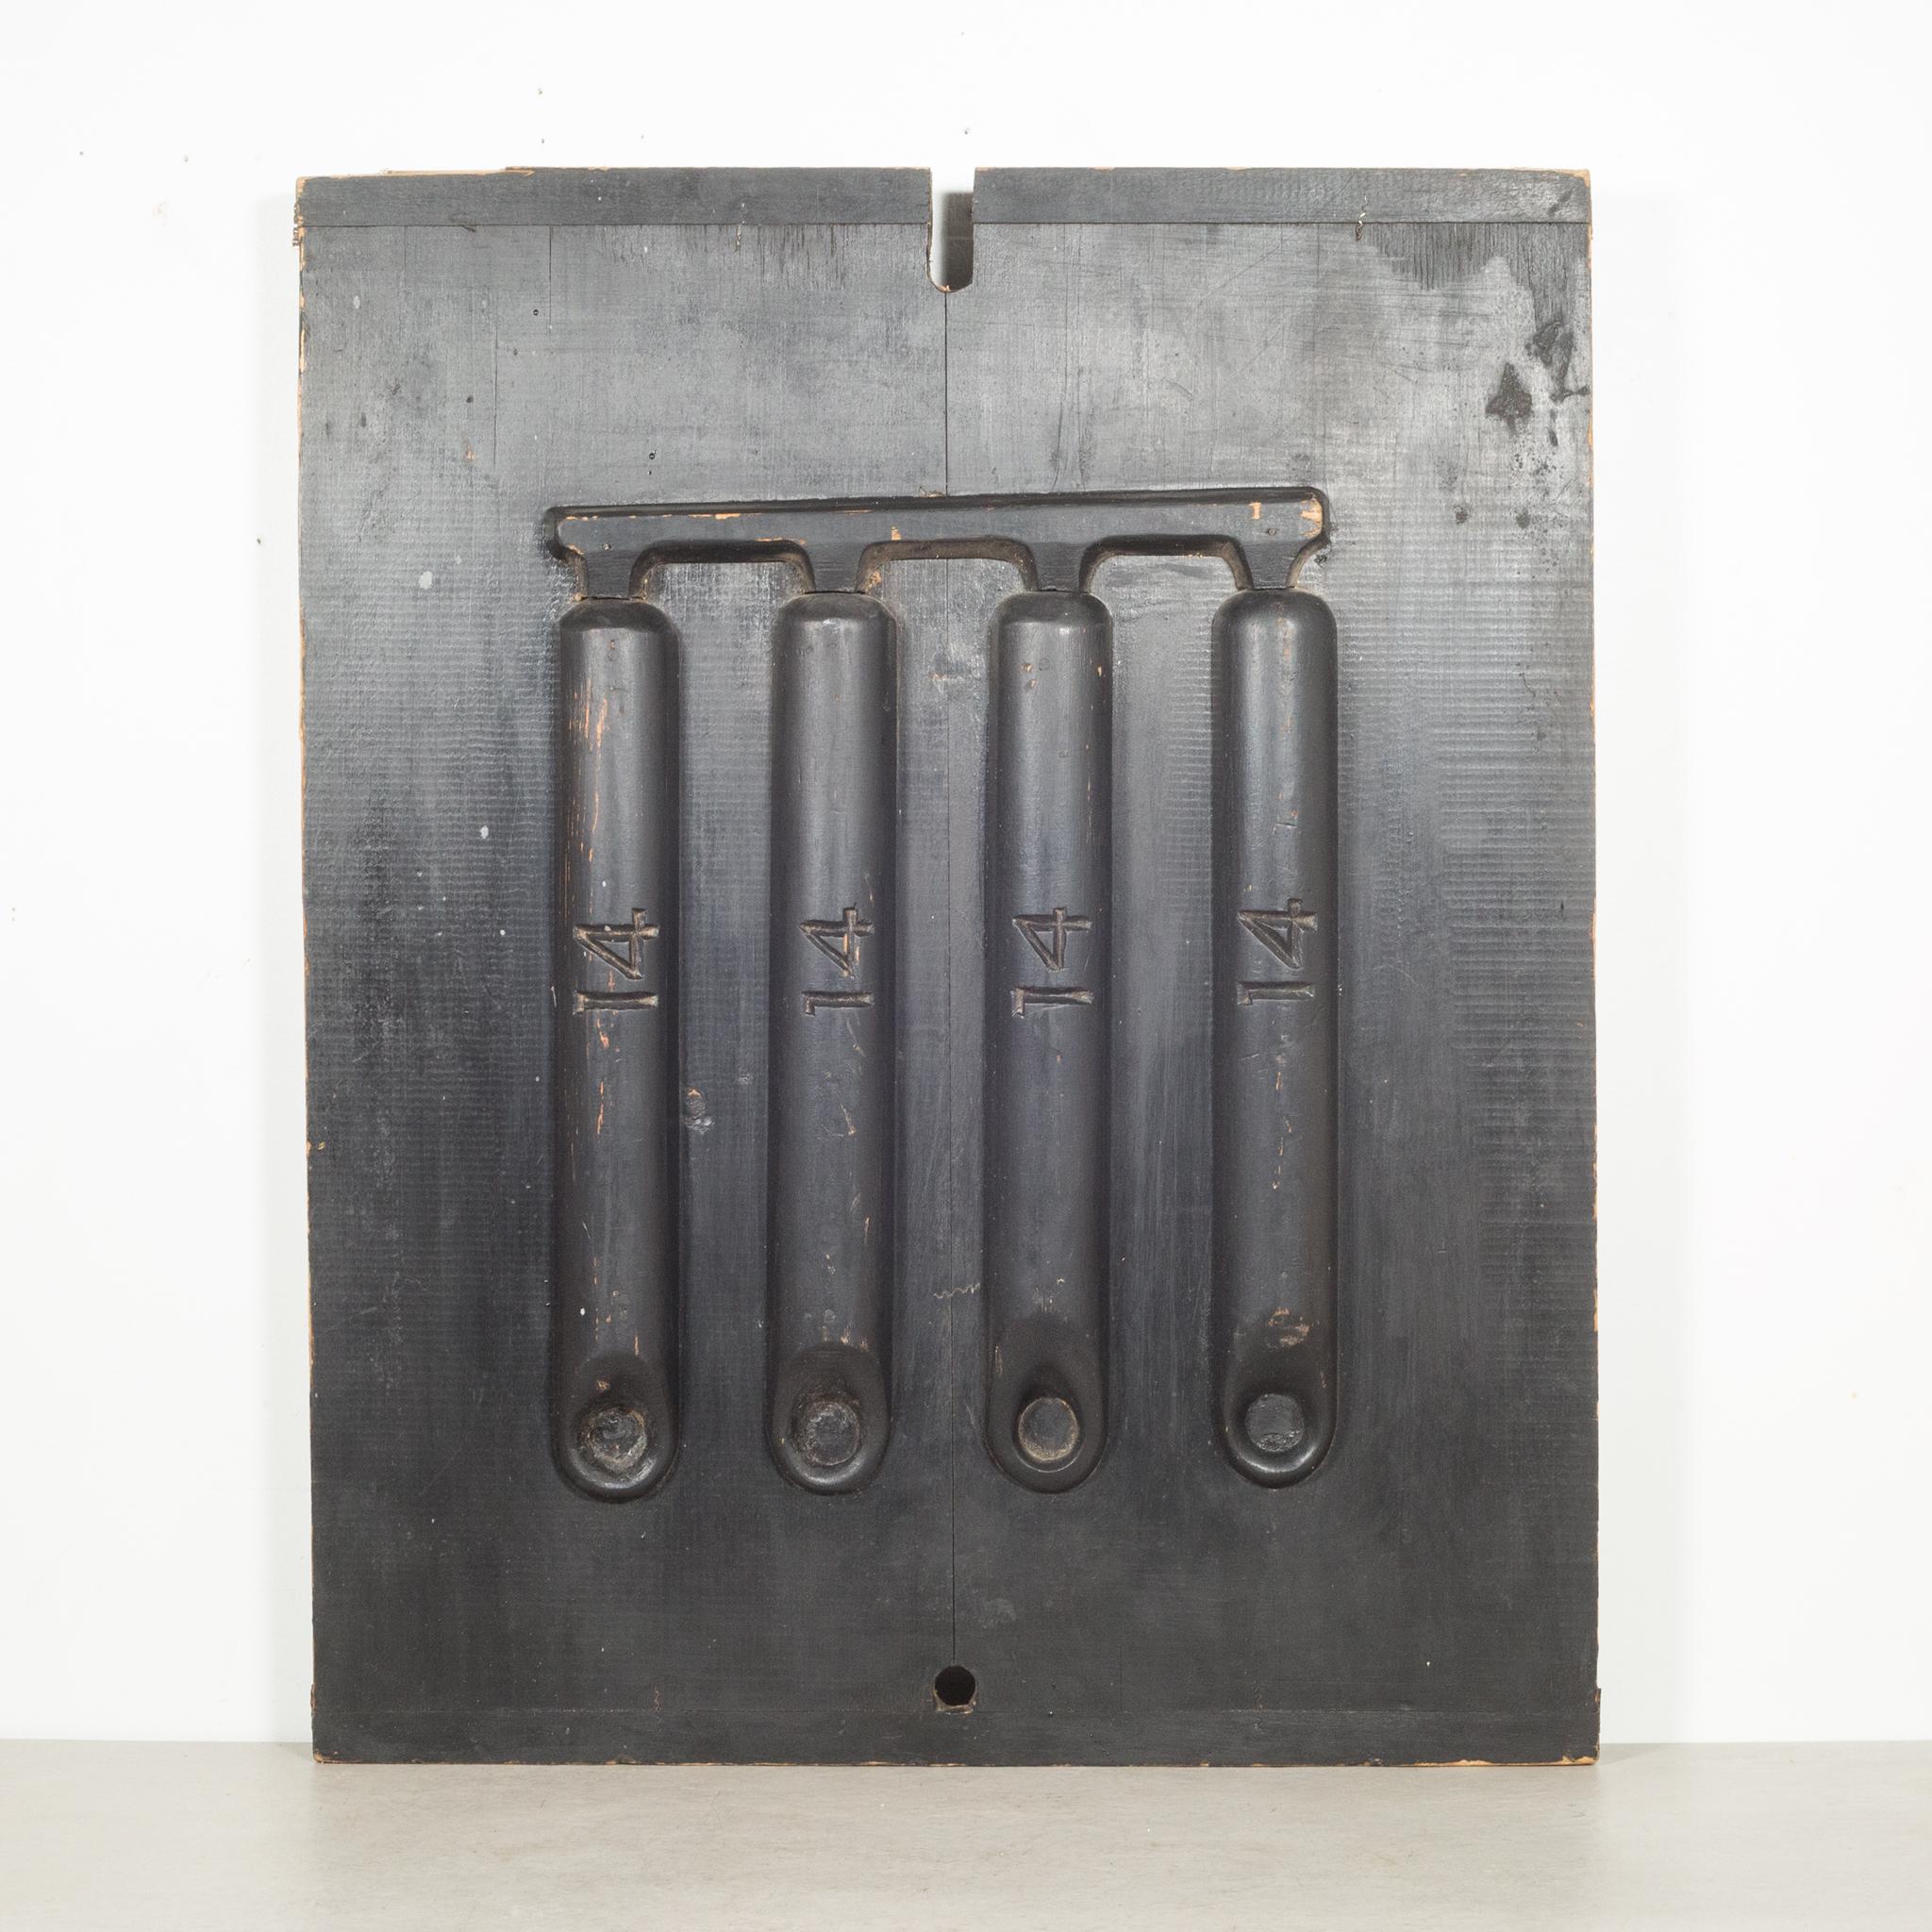 About:

Original double sided wooden foundry molds used to make numbered parts. Foundry molds are wooden tools, carved out or built up to creative negative space, which in turn is used to make the inverse form or shape to be used to be used for